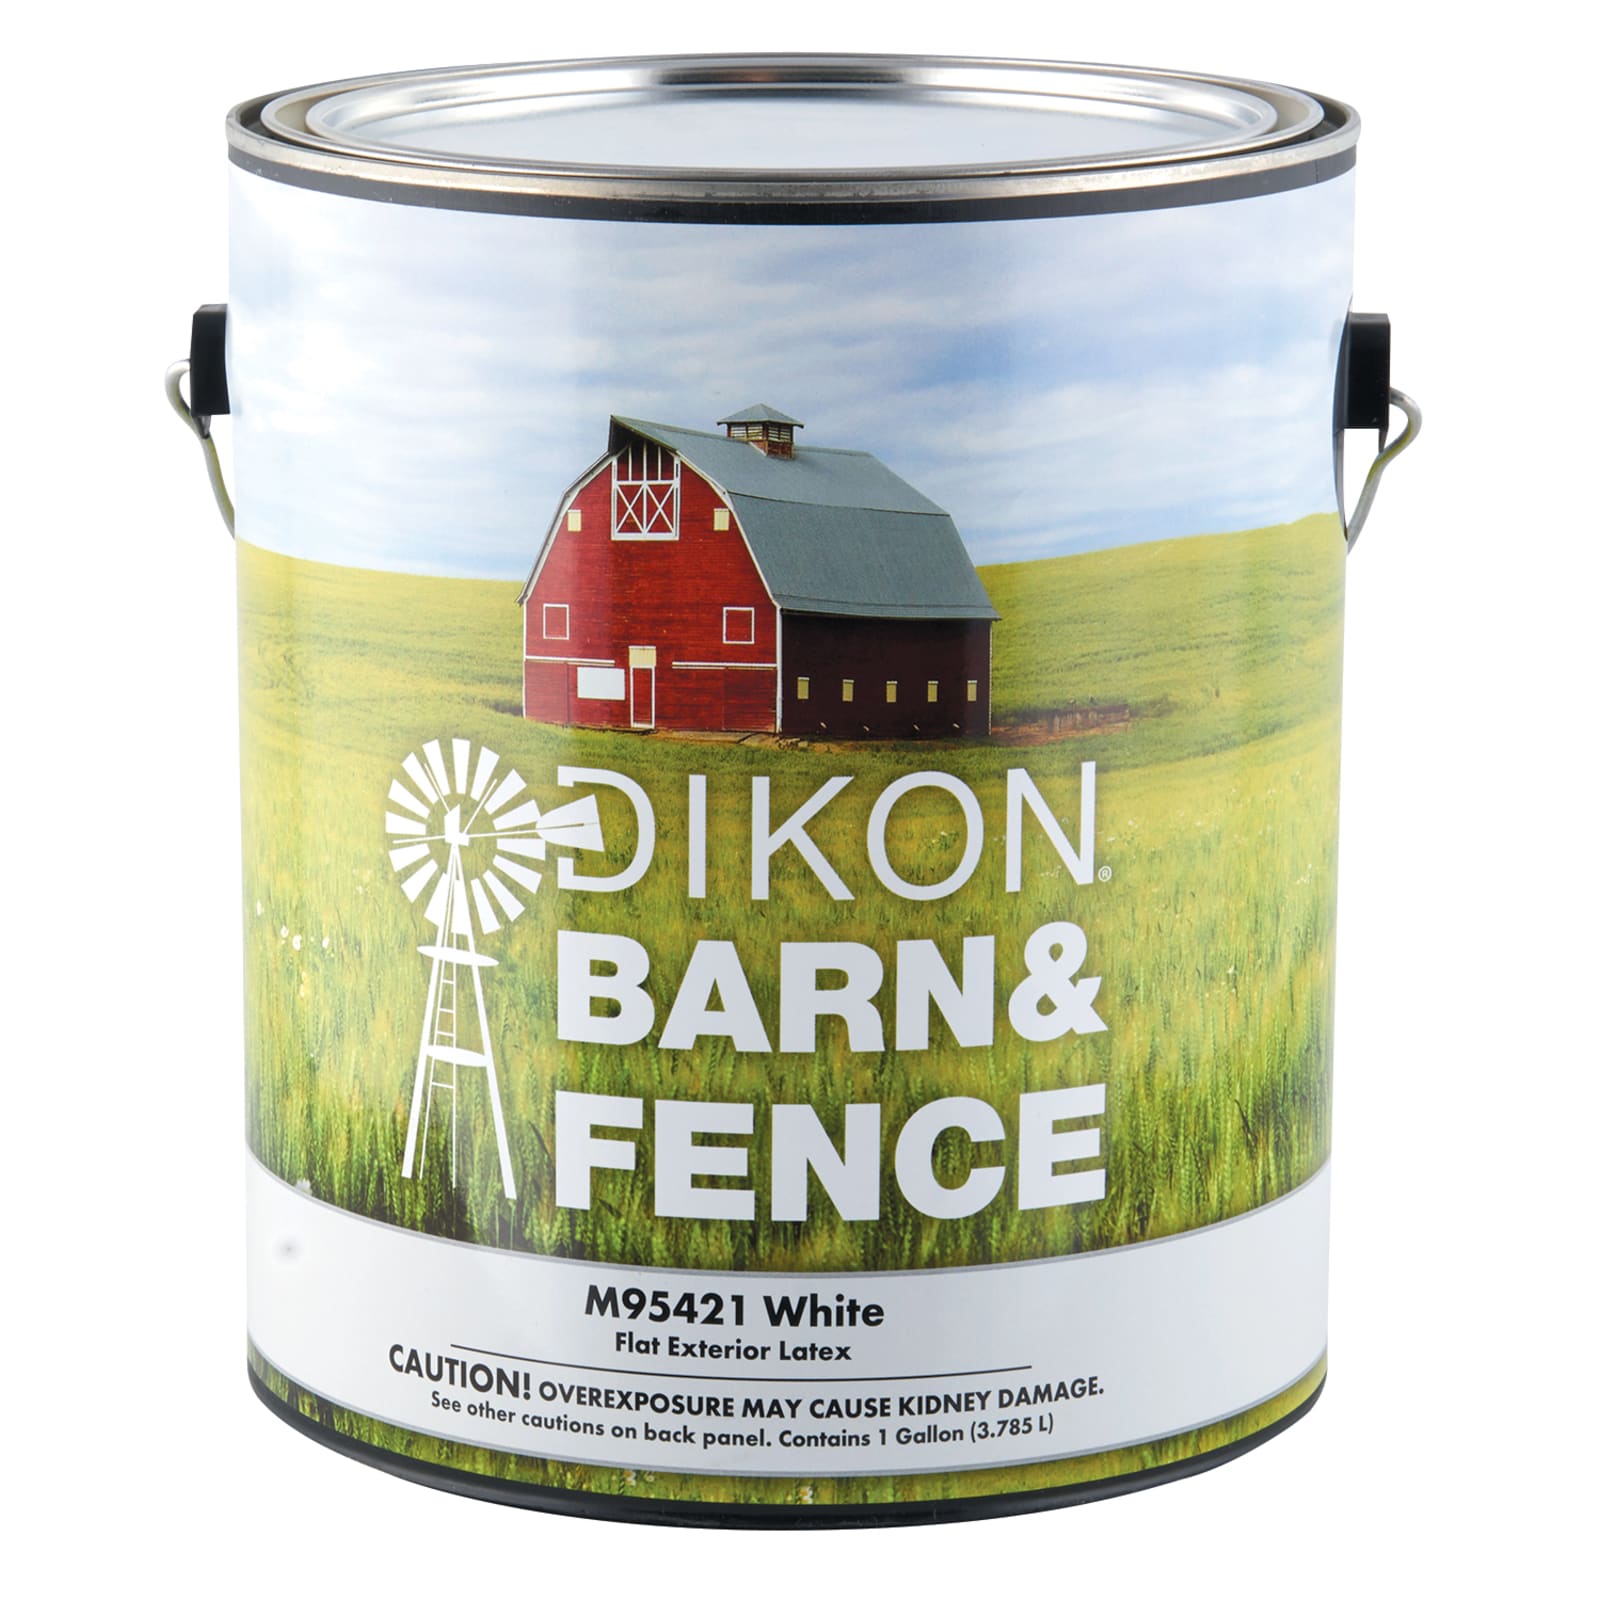 Fence and Barn Red Oil Based Paint, 5 Gallon